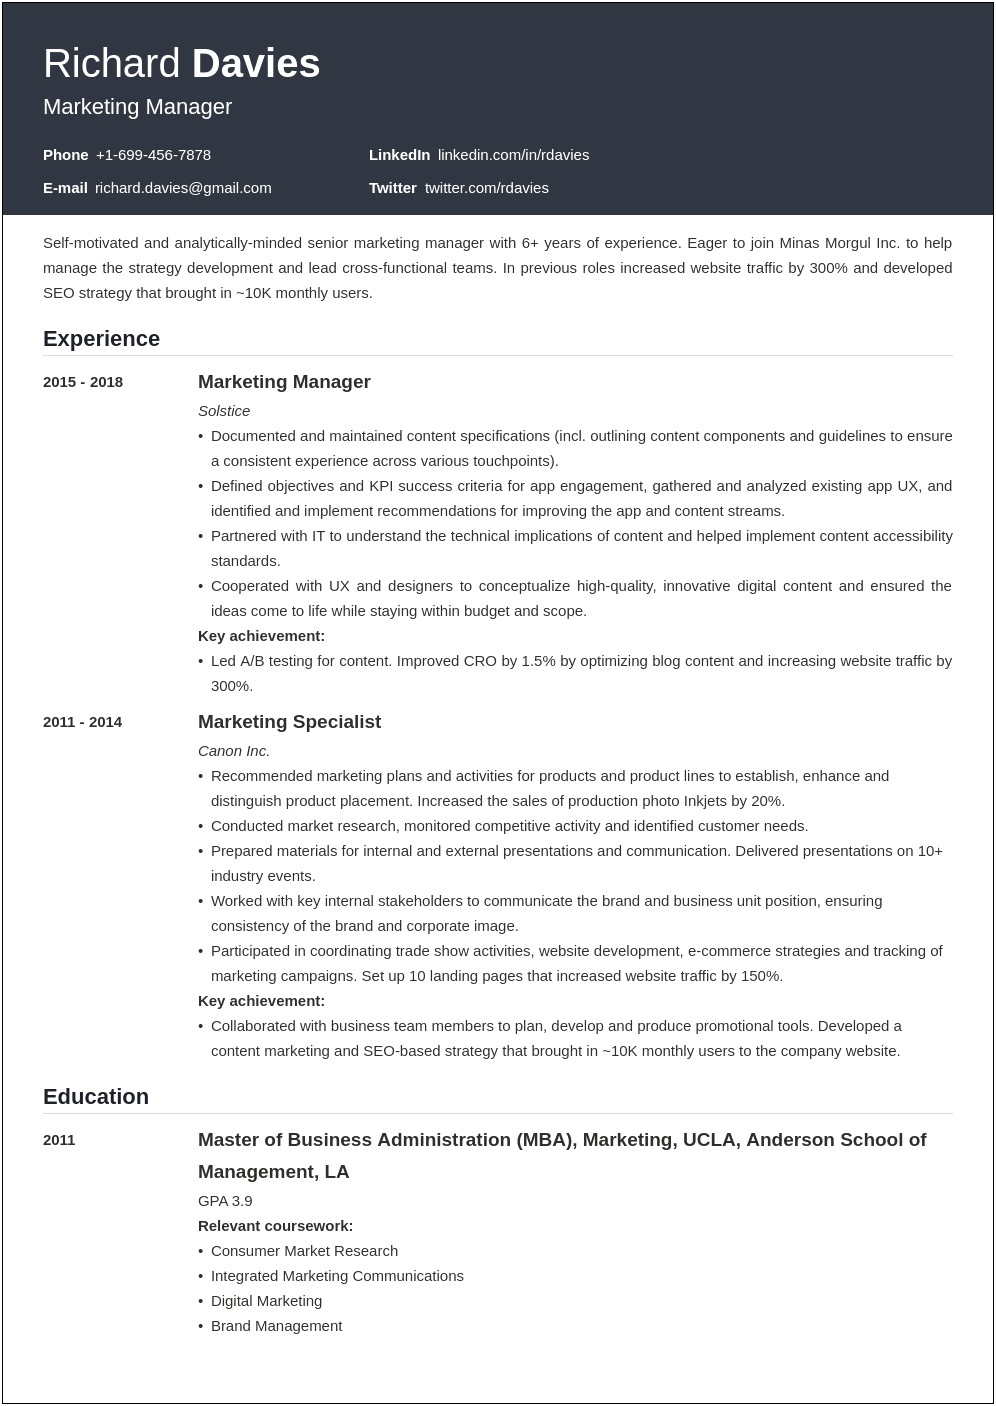 Resume Samples For Experienced Professionals In Marketing